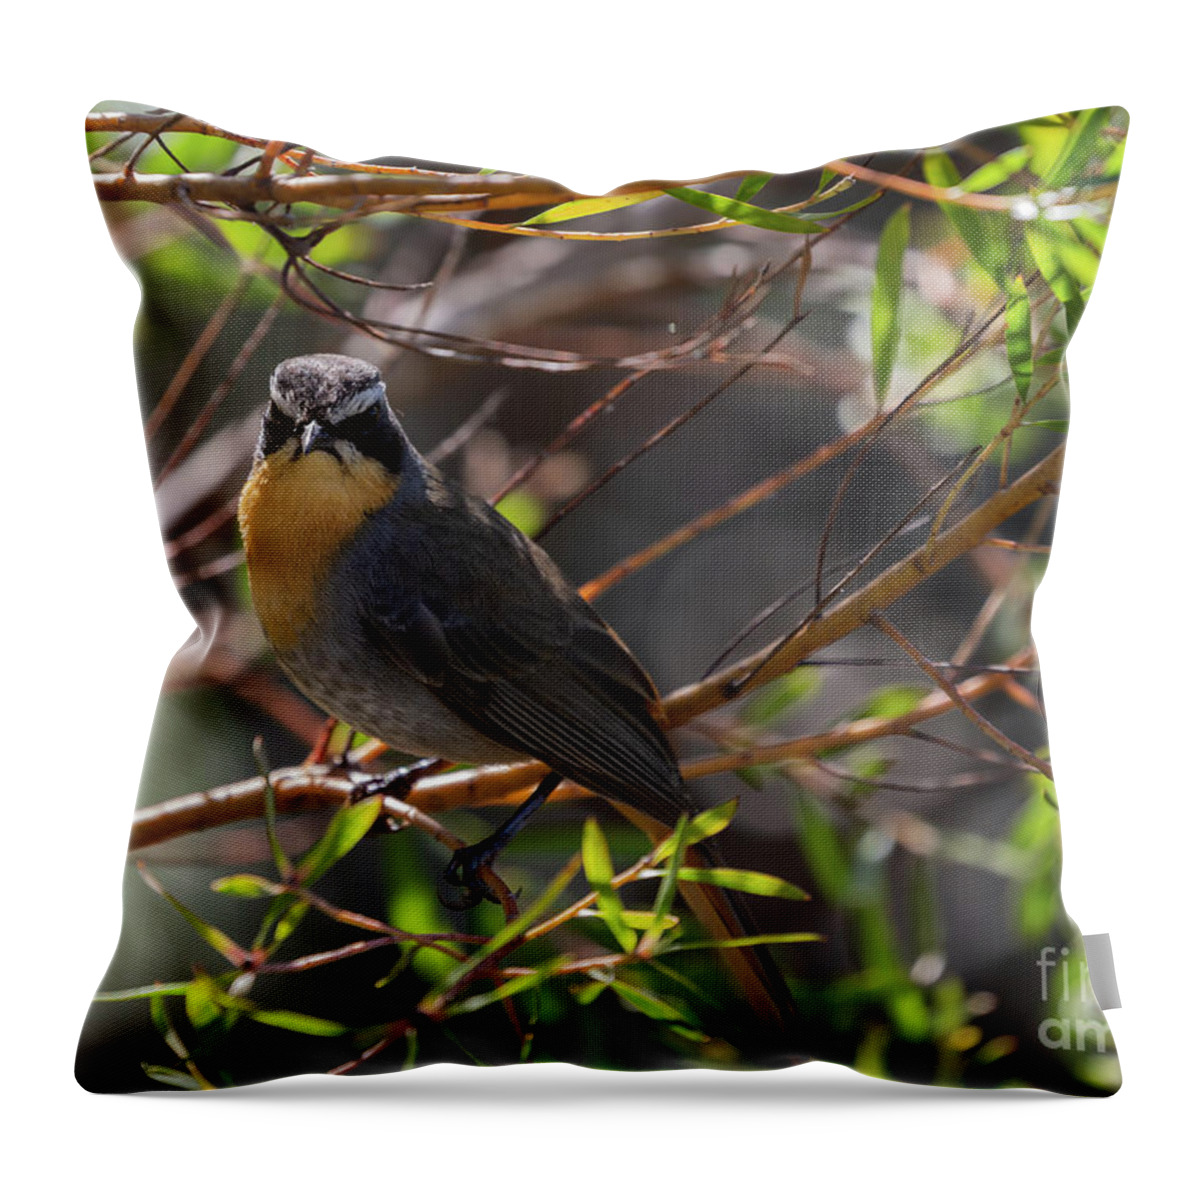 Cape Robin-chat Throw Pillow featuring the photograph Cape Robin-Chat by Eva Lechner